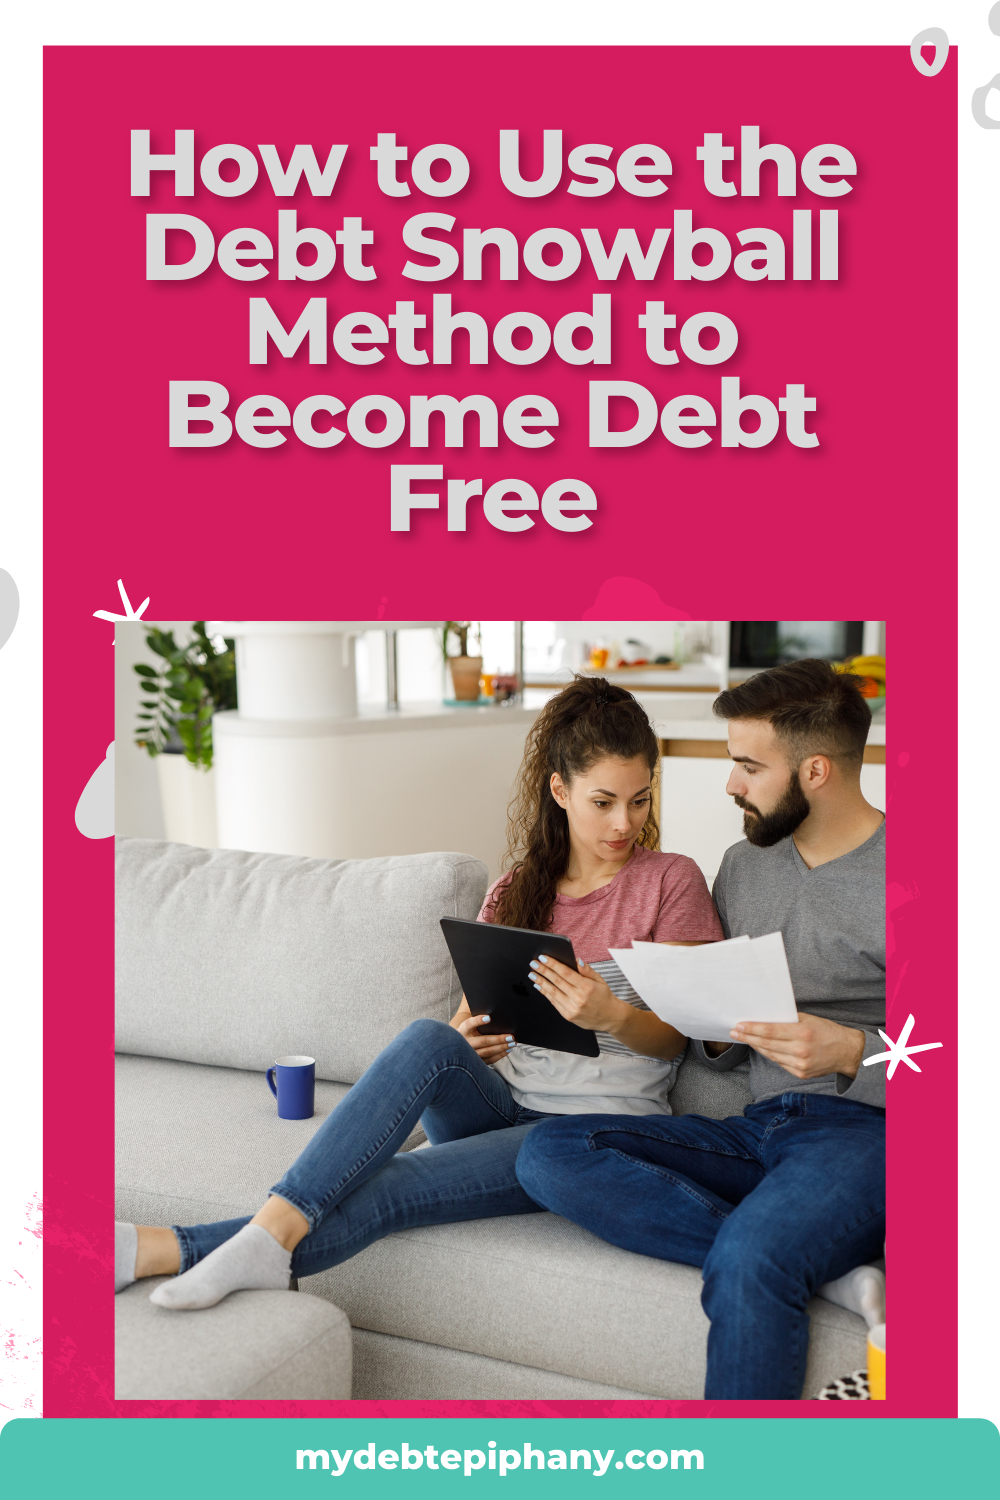 Reaching Monetary Freedom With the Debt Snowball Methodology